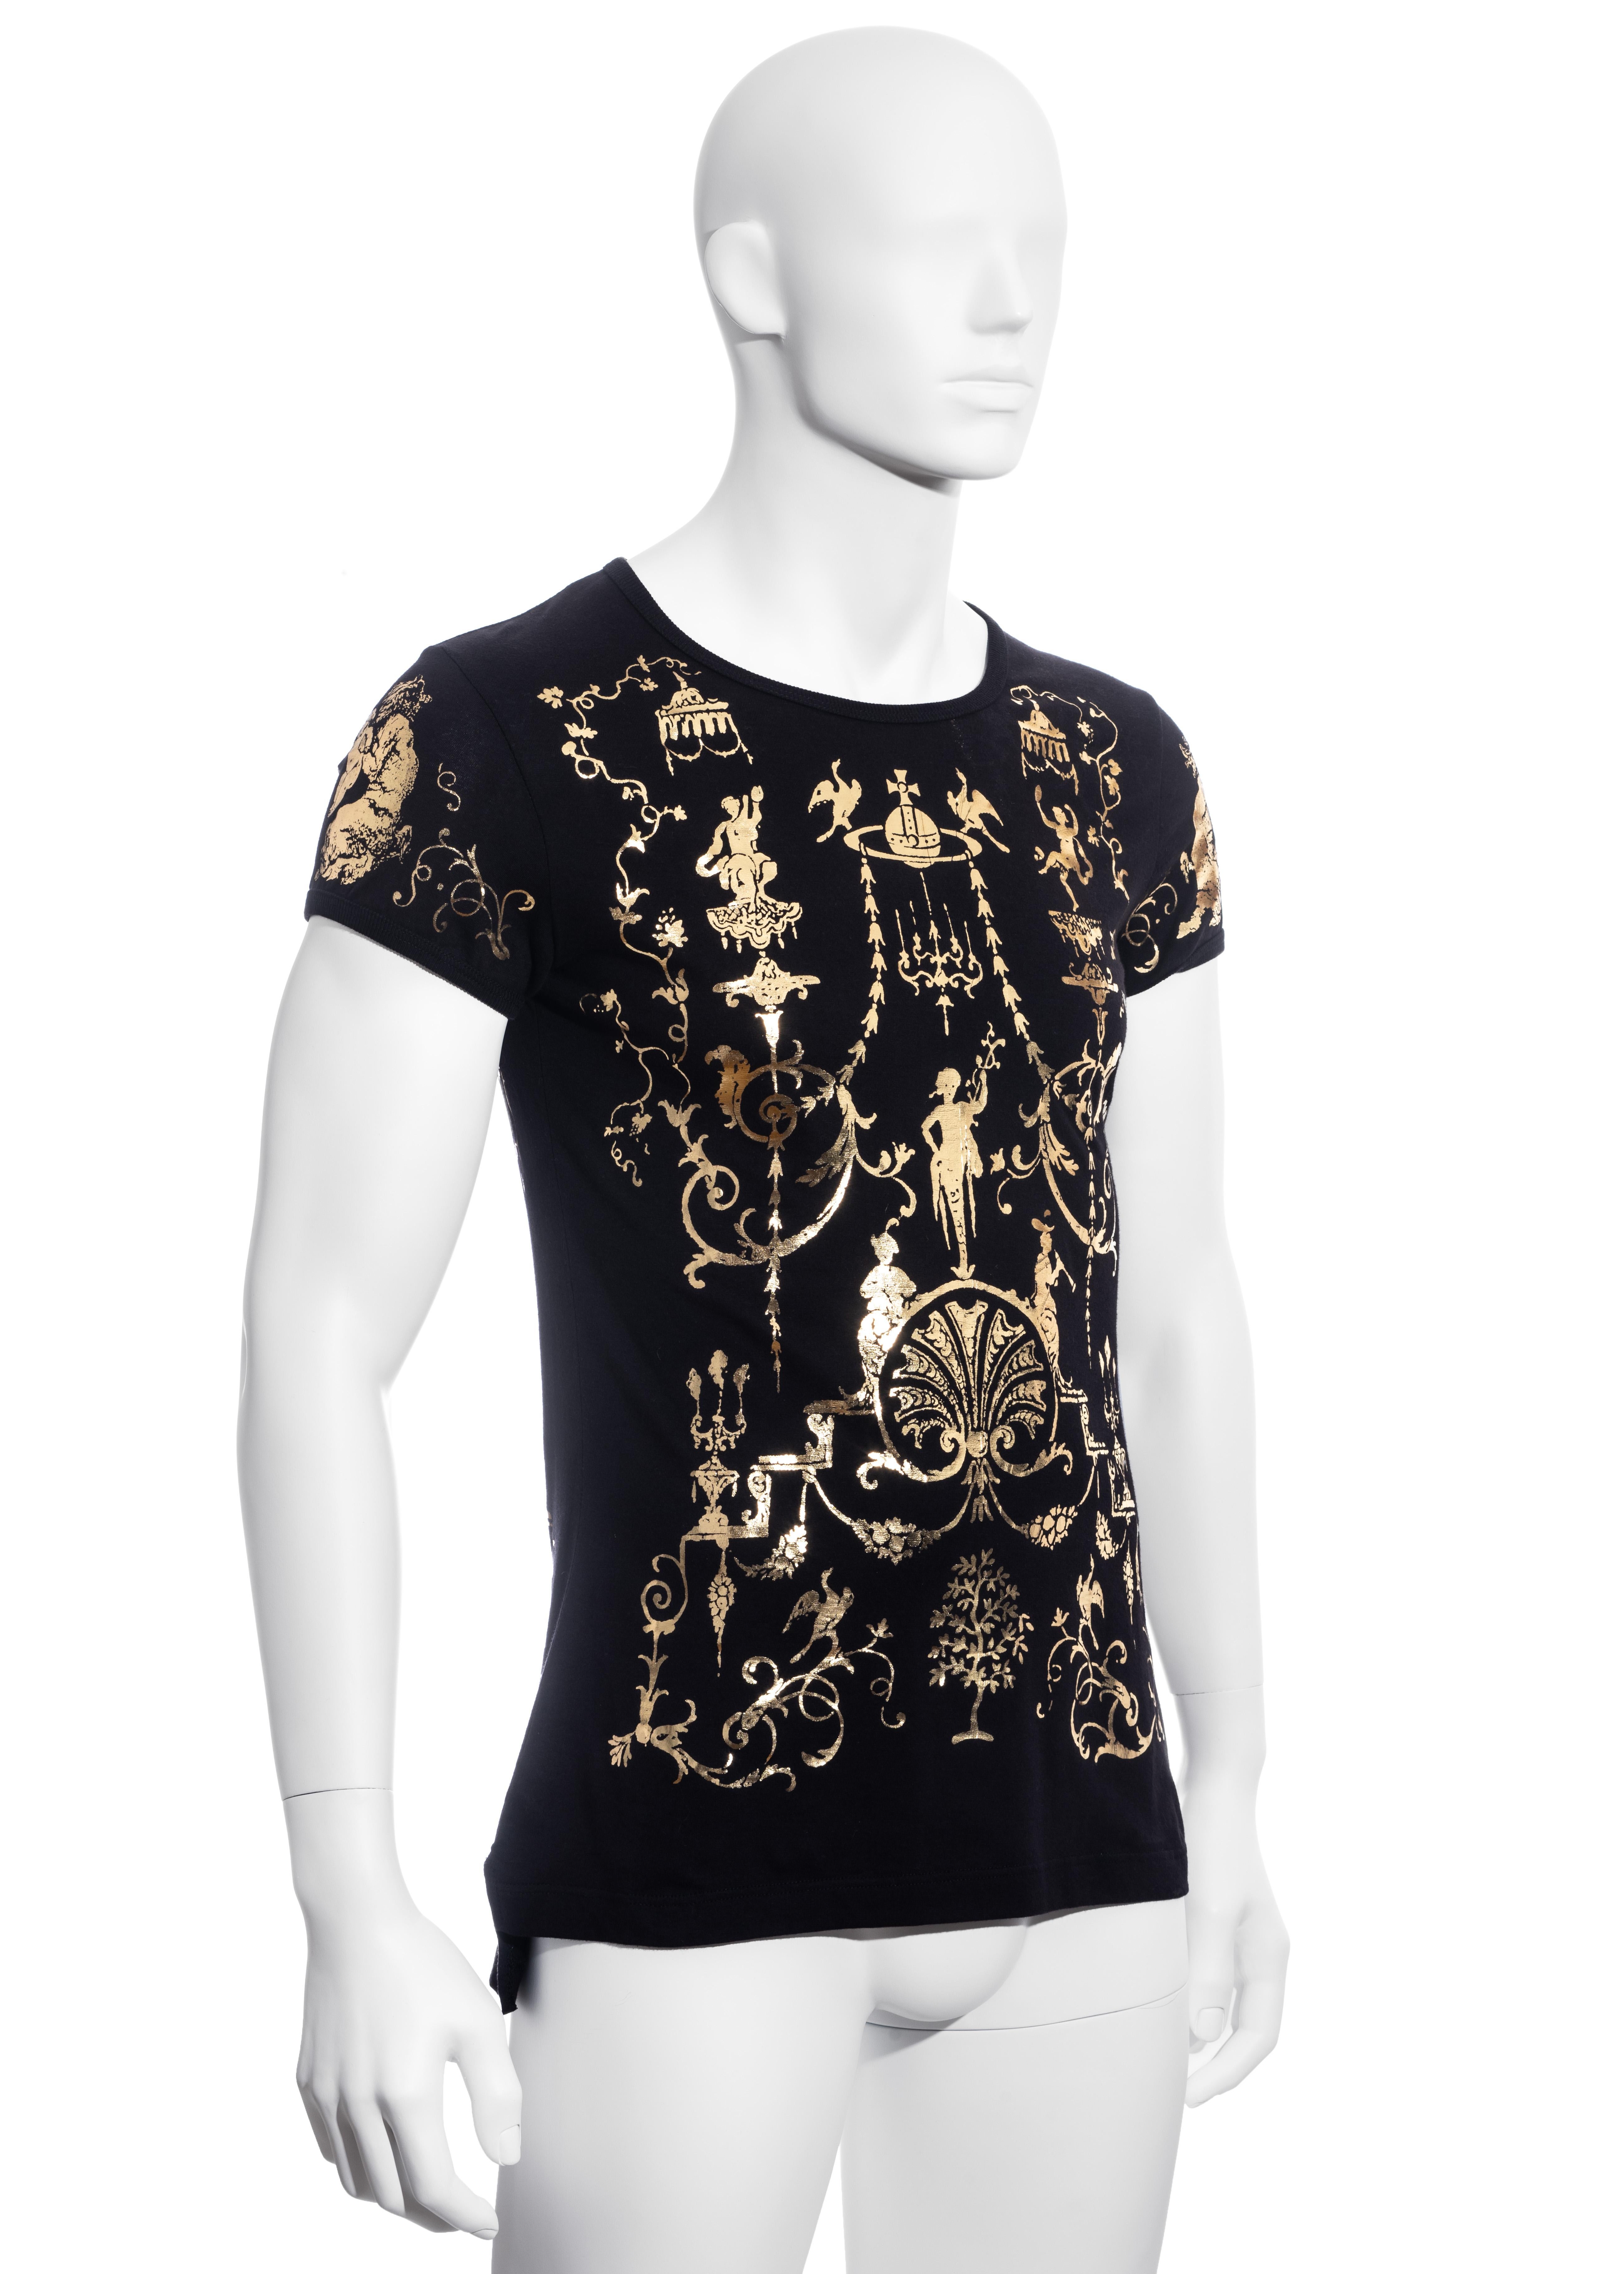 Men's Vivienne Westwood black cotton t-shirt with metallic gold print, fw 1990 In Good Condition For Sale In London, GB